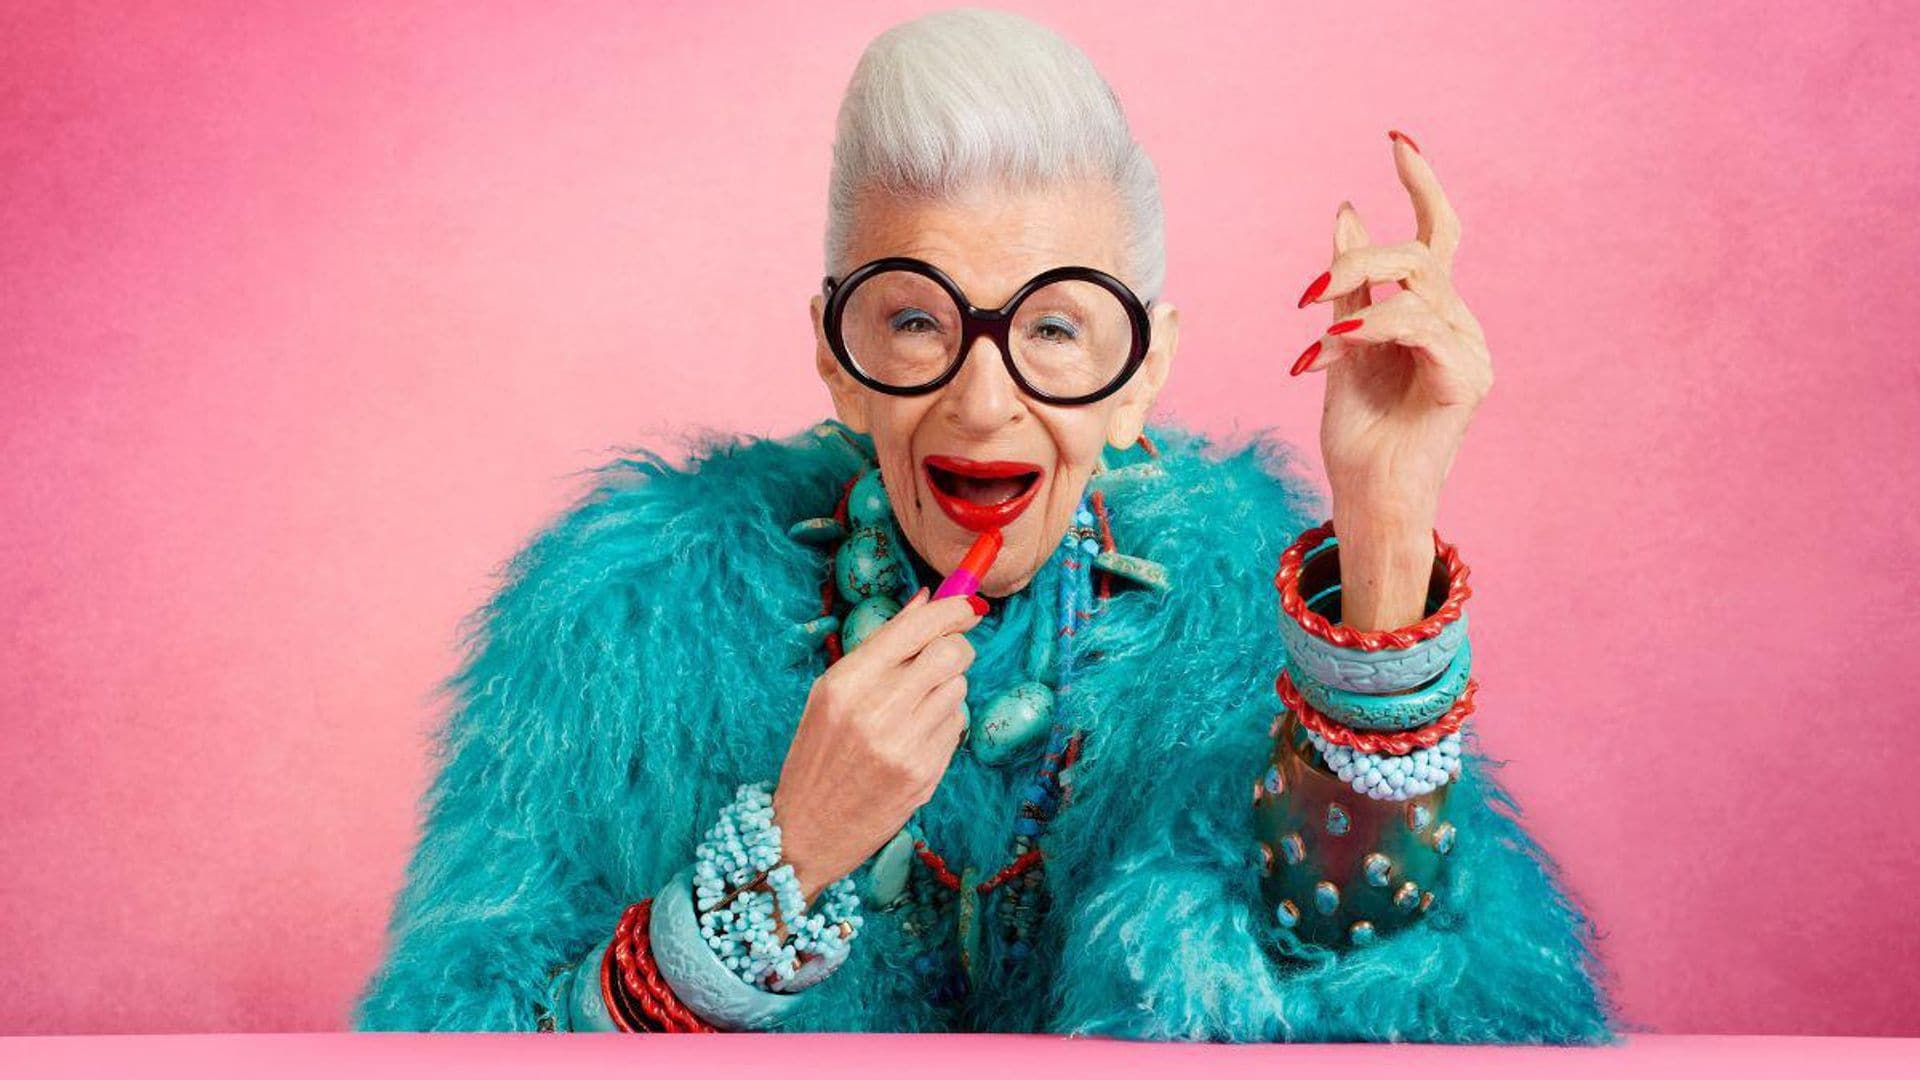 Unstoppable at 101: Iris Apfel launches new makeup collection, proves it’s never too late to be your authentic self